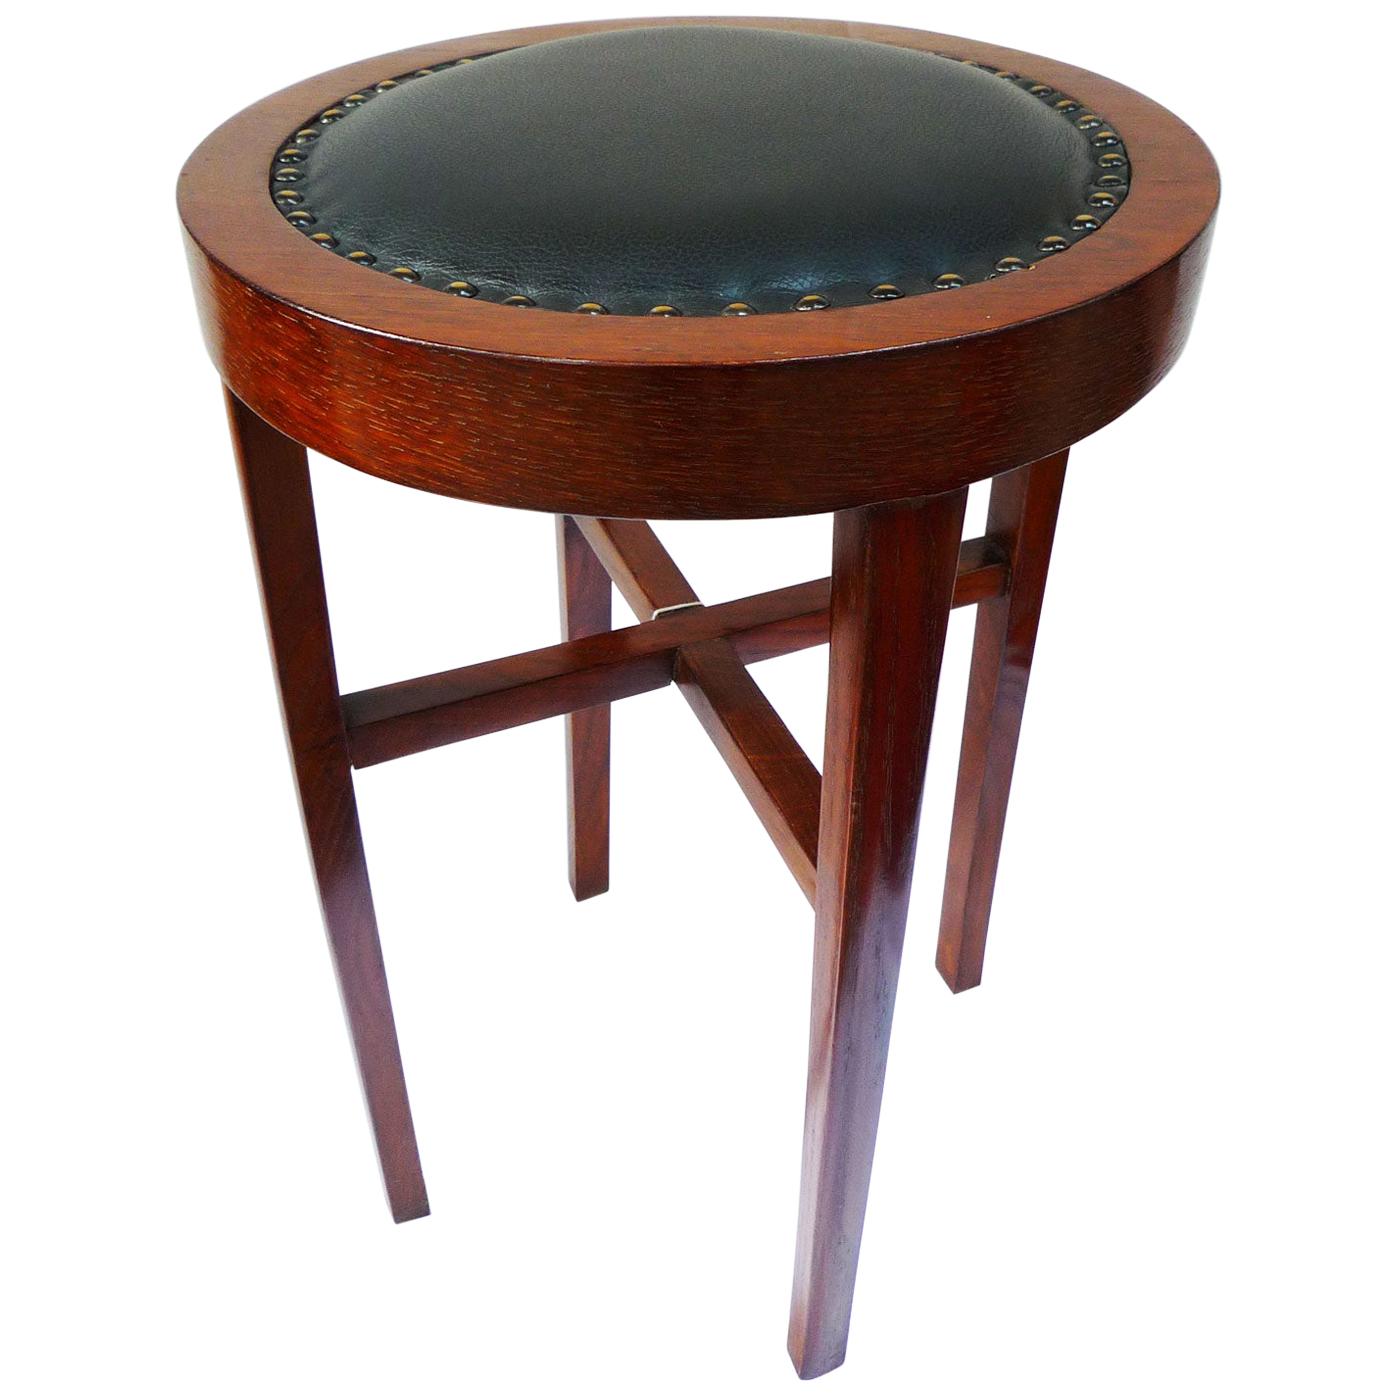 Classicist Stool with Leather Upholstery